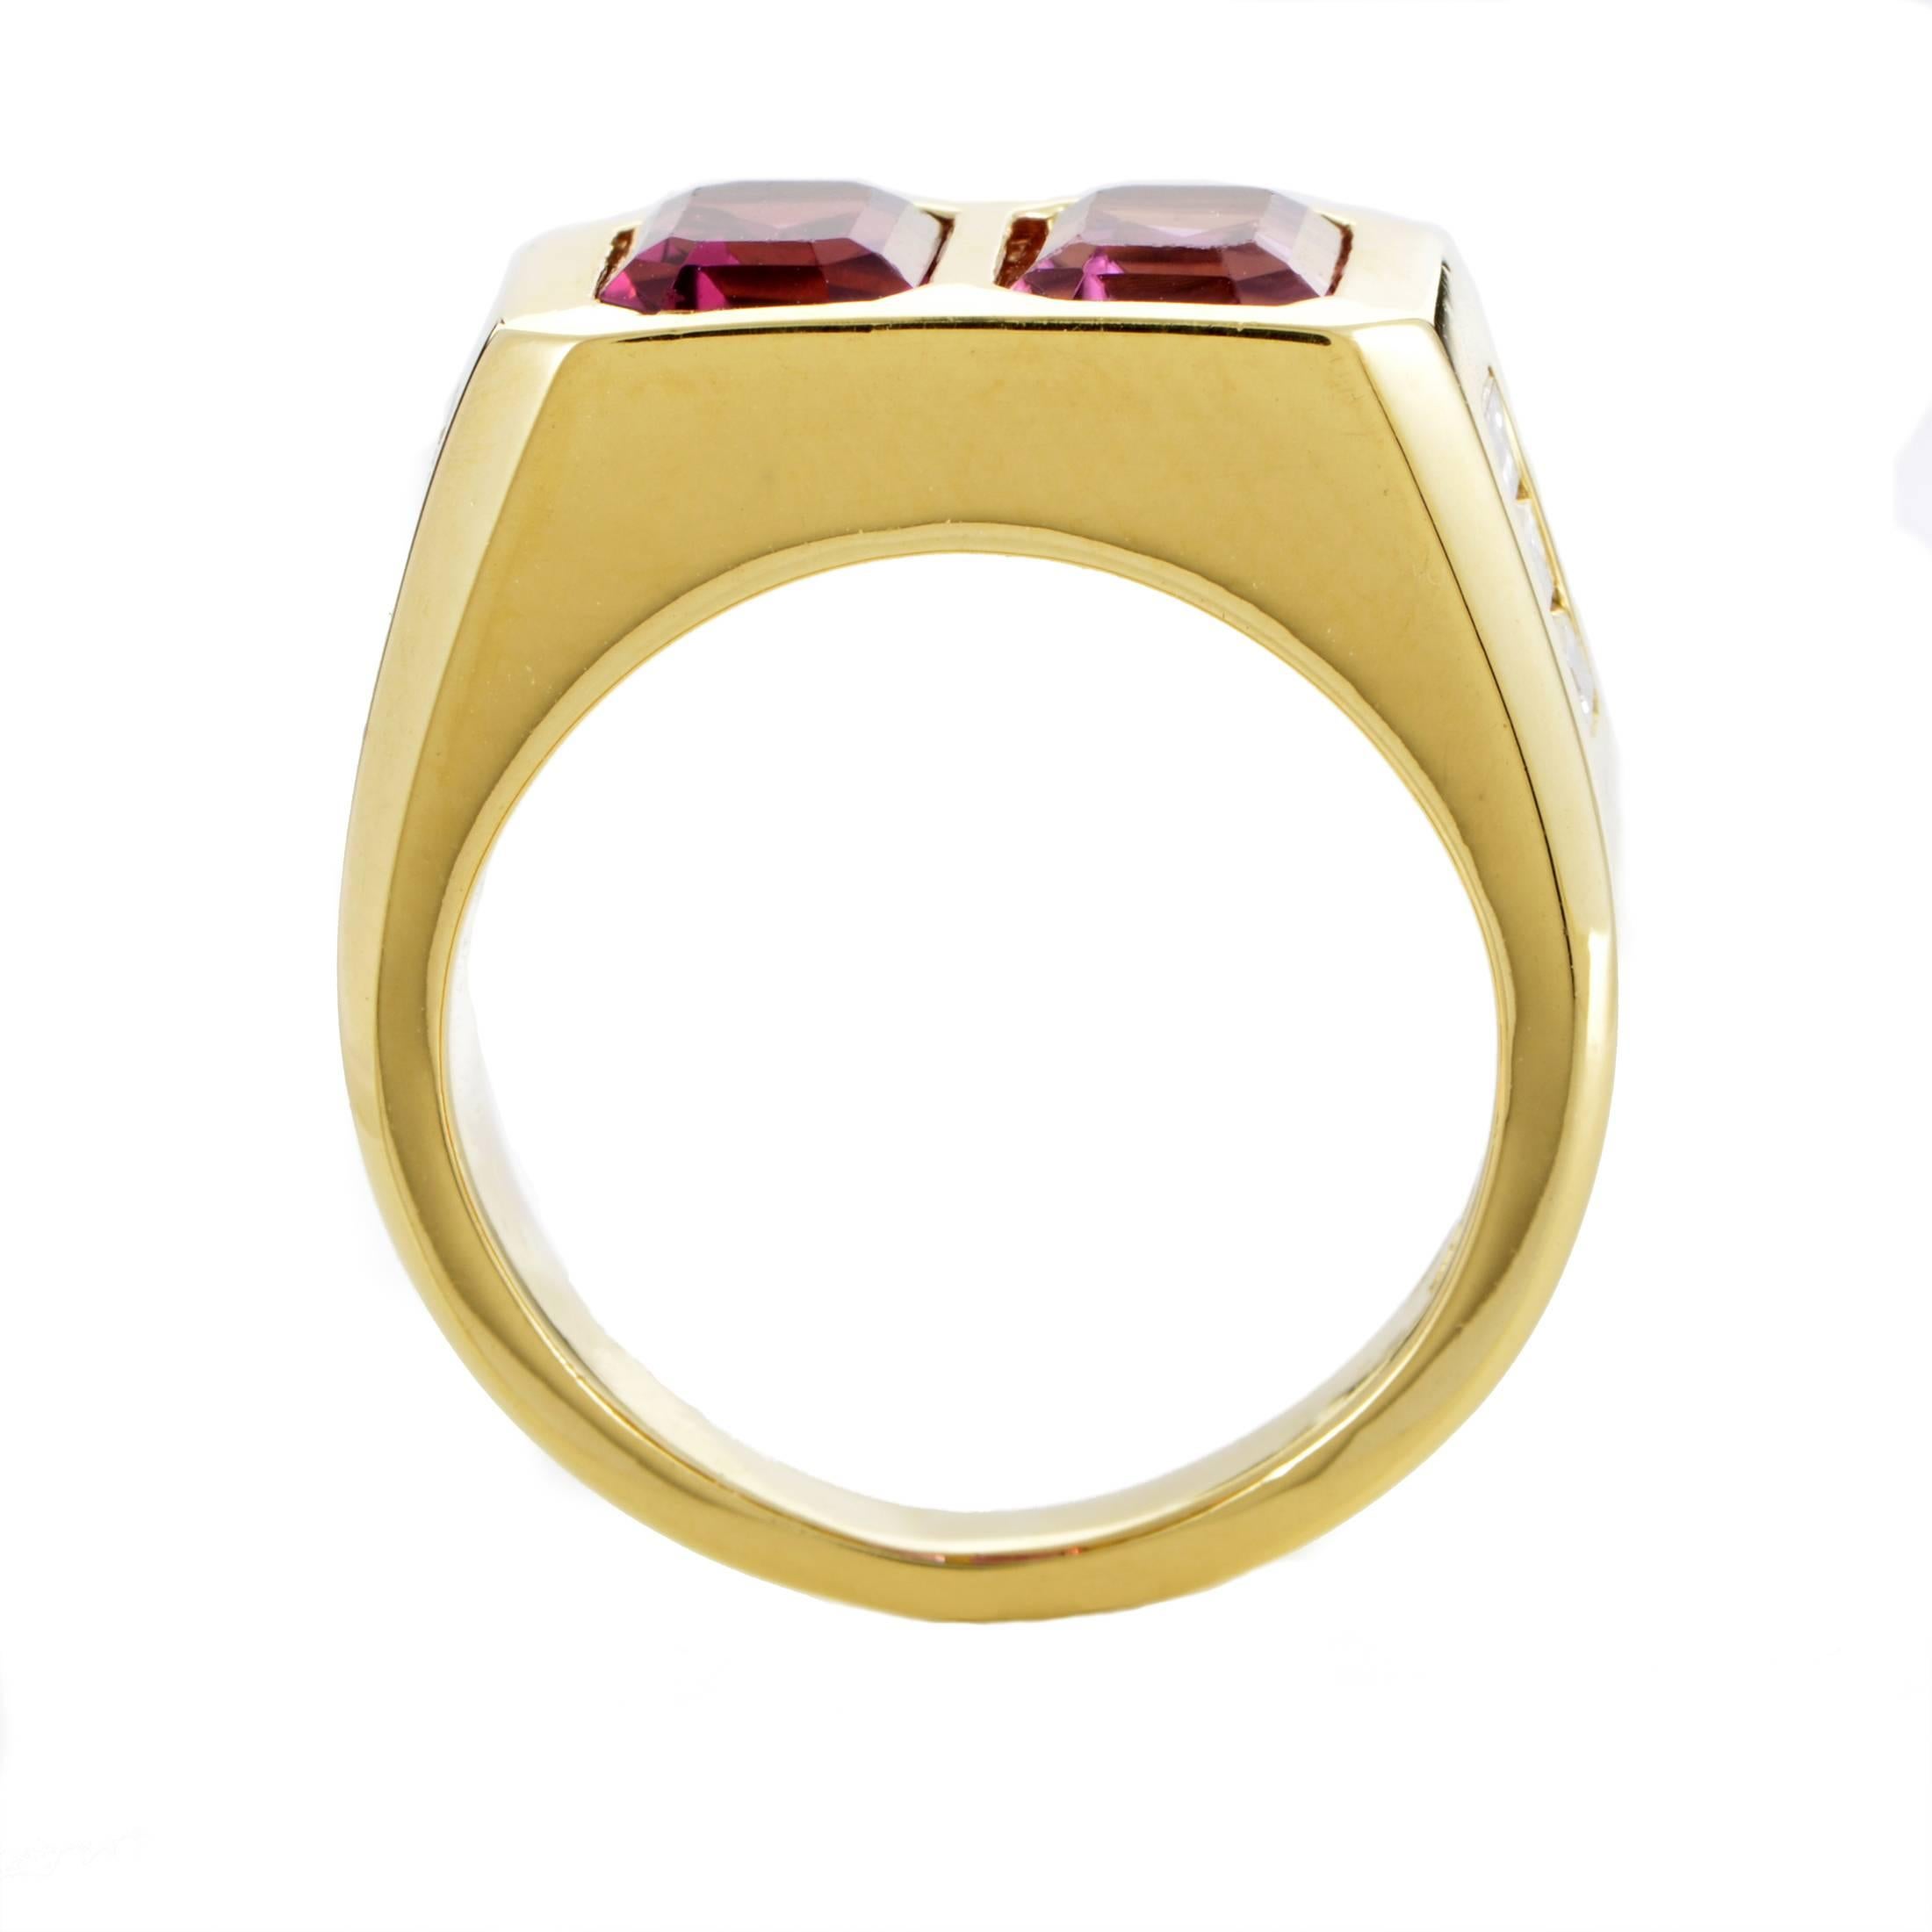 The neat shape and impeccable polish of the 18K yellow gold body are matched perfectly by the expertly cut and contrasting pink tourmalines as well as stunning diamonds totaling 0.40ct in this outstanding ring from Bulgari.
Ring Size: 5.0